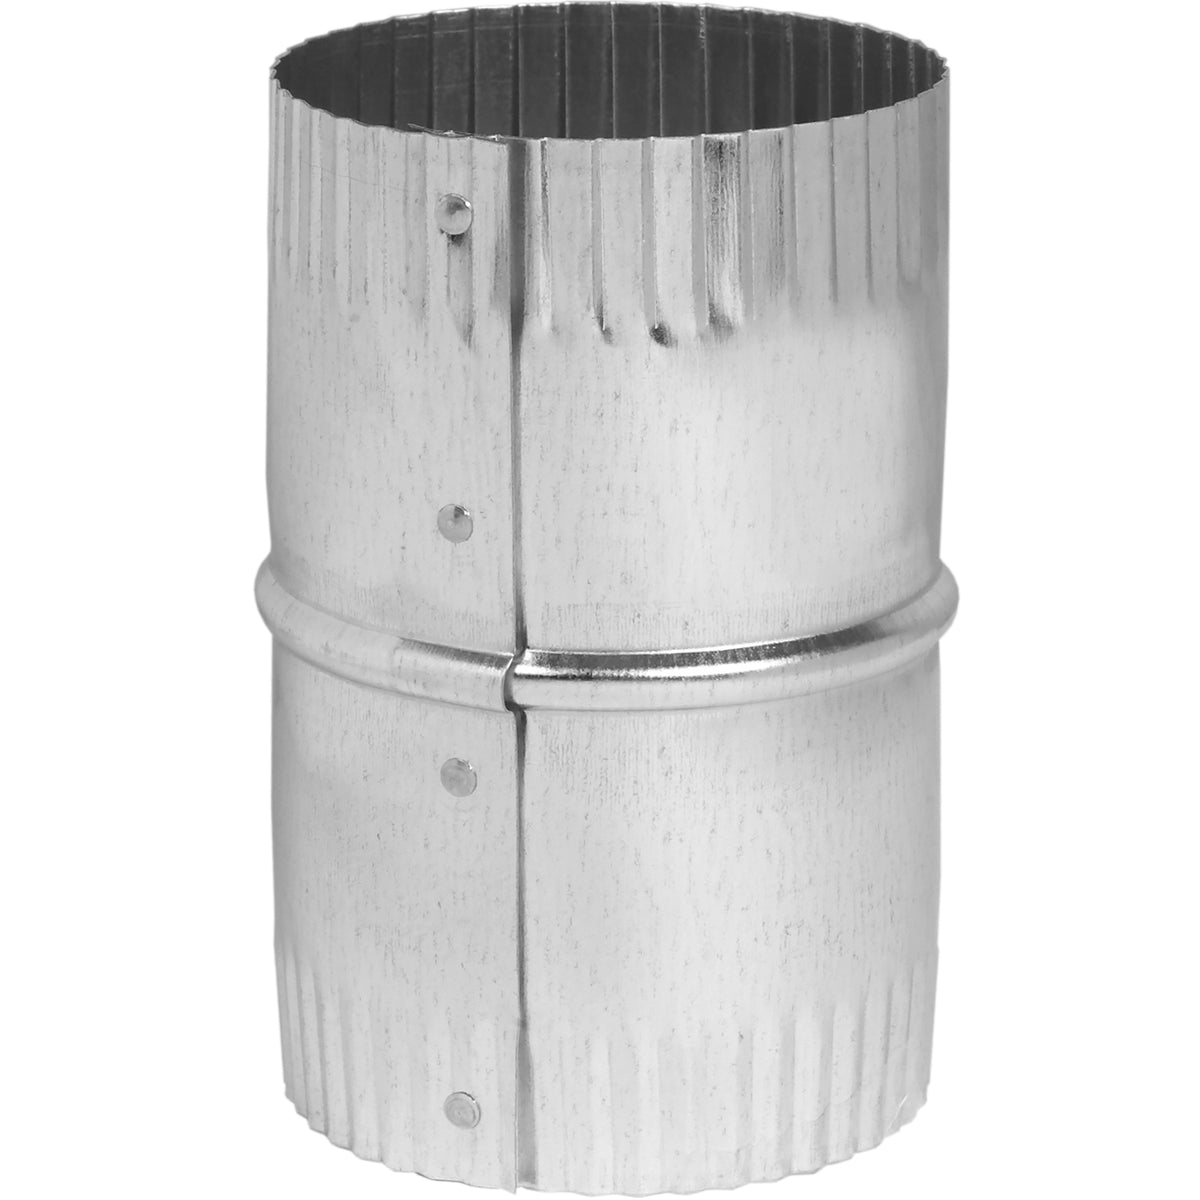 Imperial GV1588 Galvanized Round Duct Connector Union, 4"